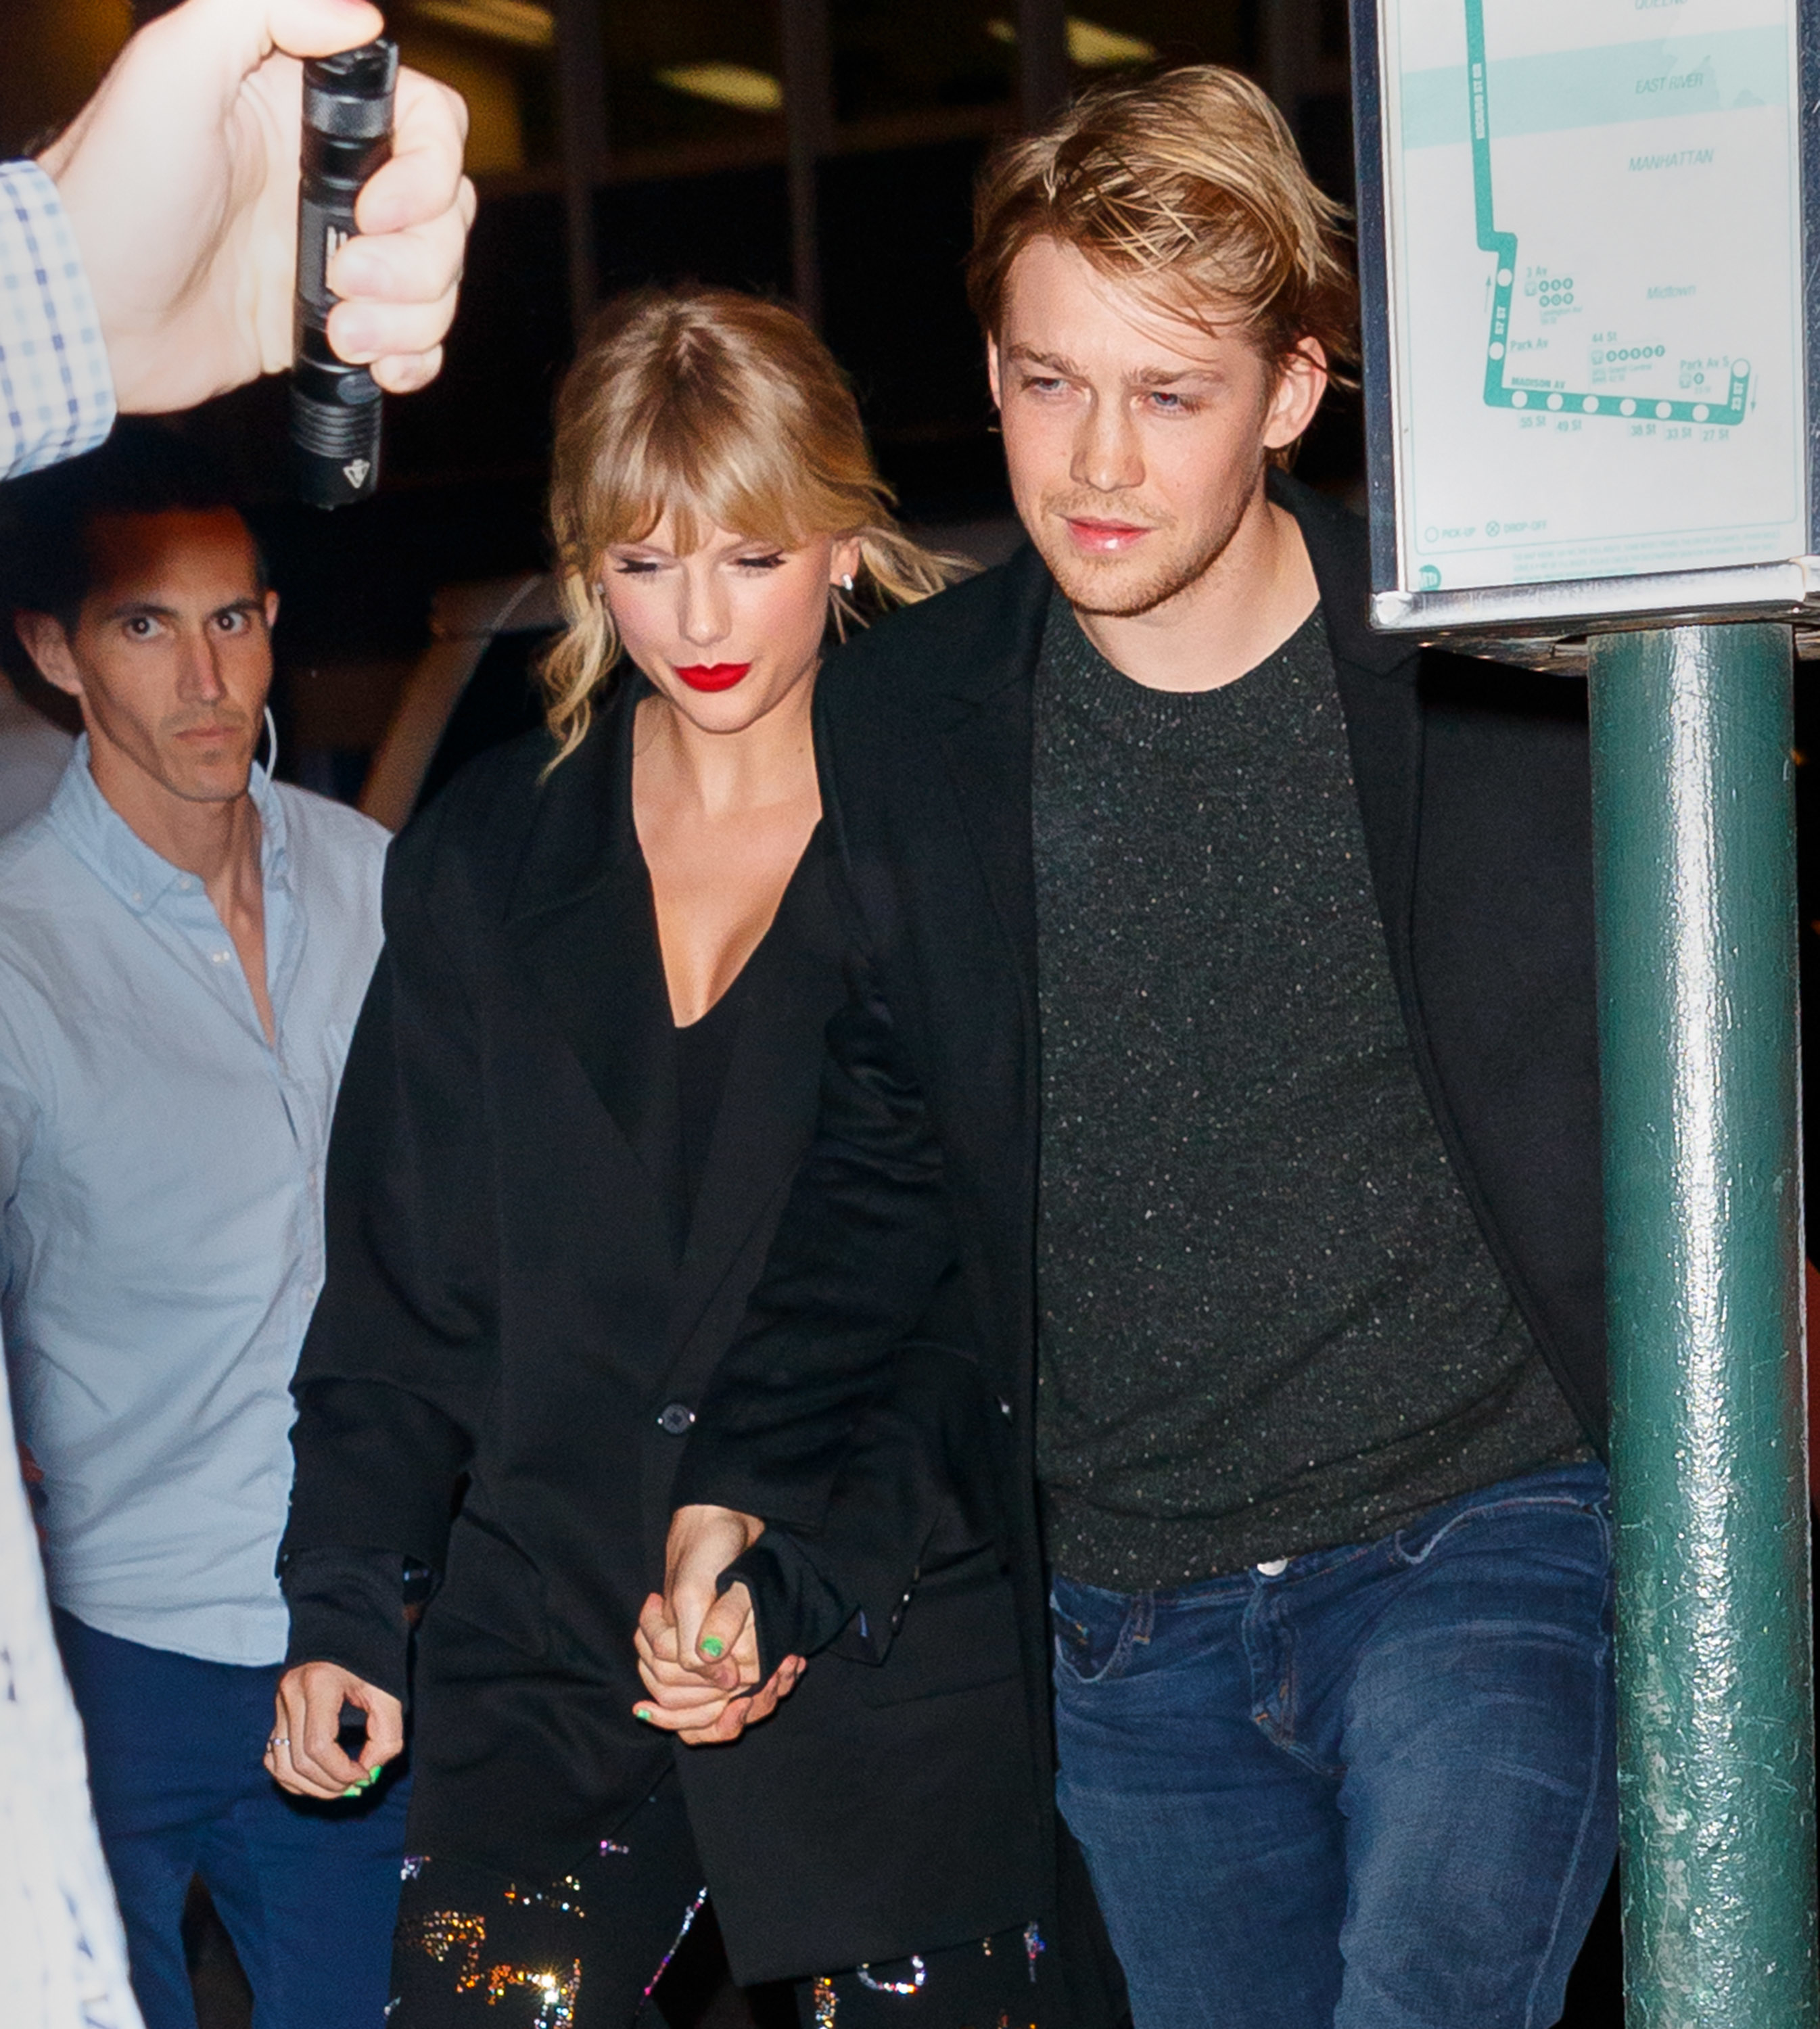 Taylor Swift and Joe Alwyn walking together, Taylor in a black jacket with sparkly accents